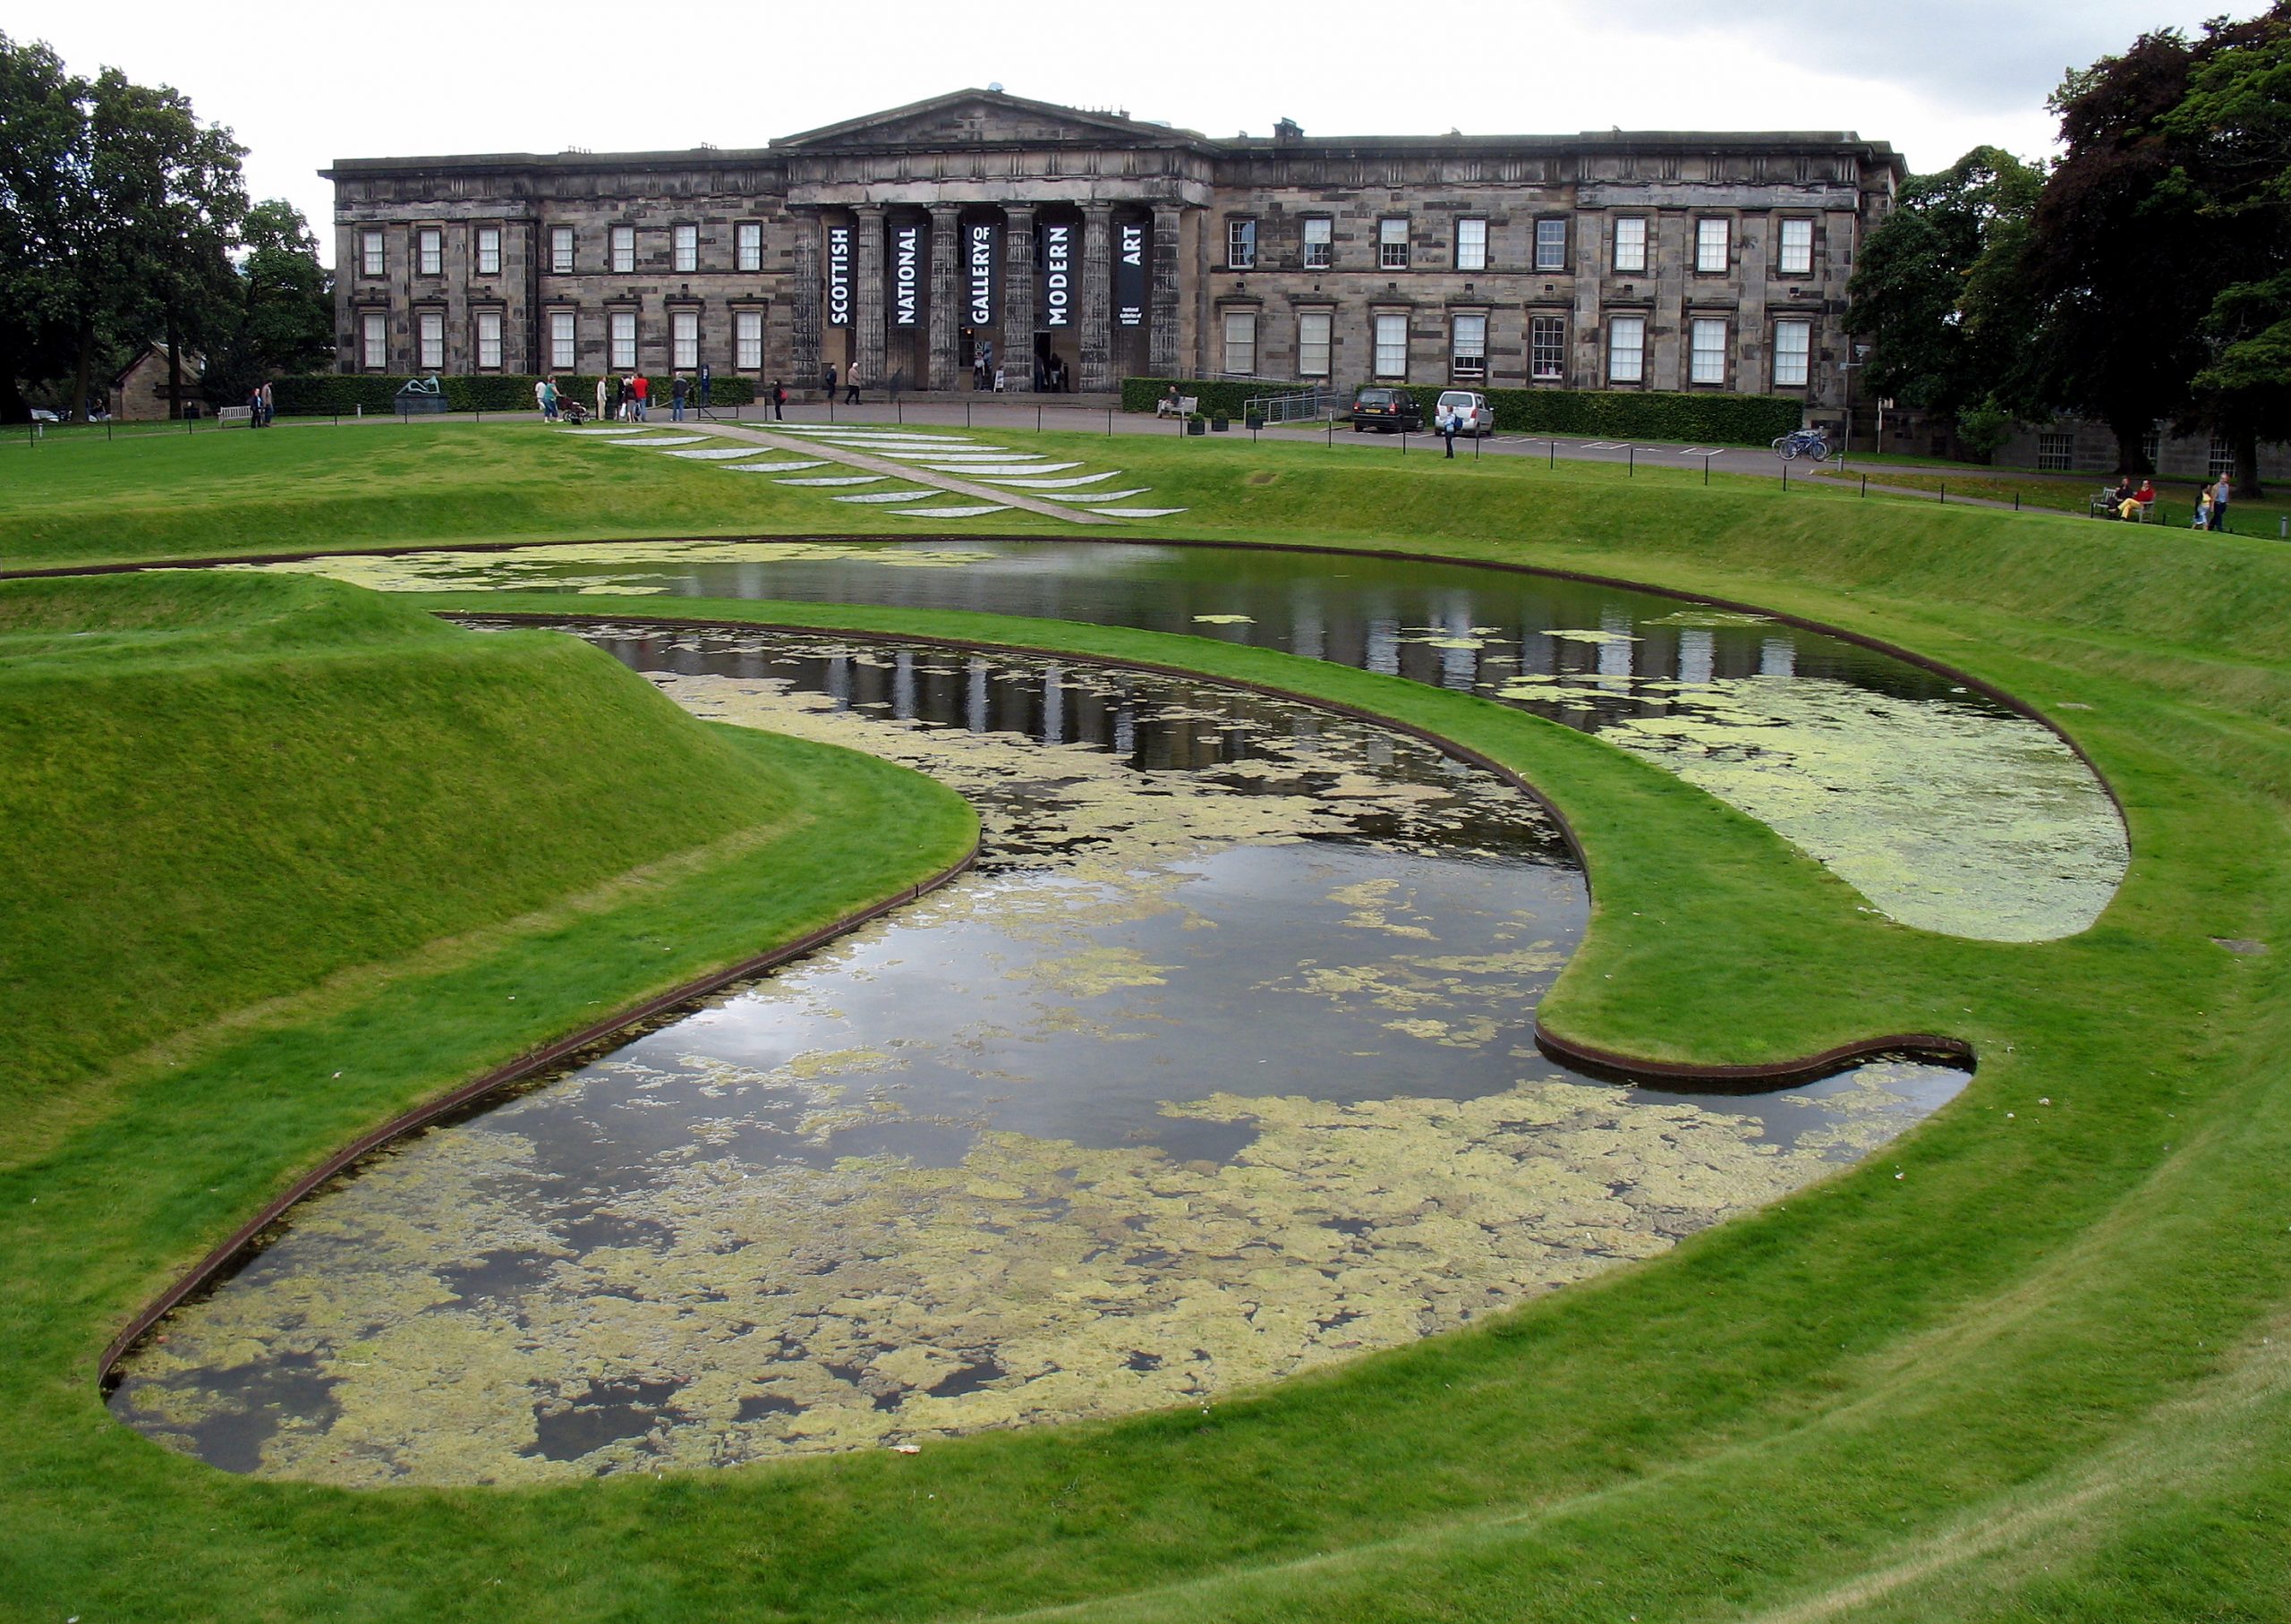 Image of the Scottish National Museum of Art